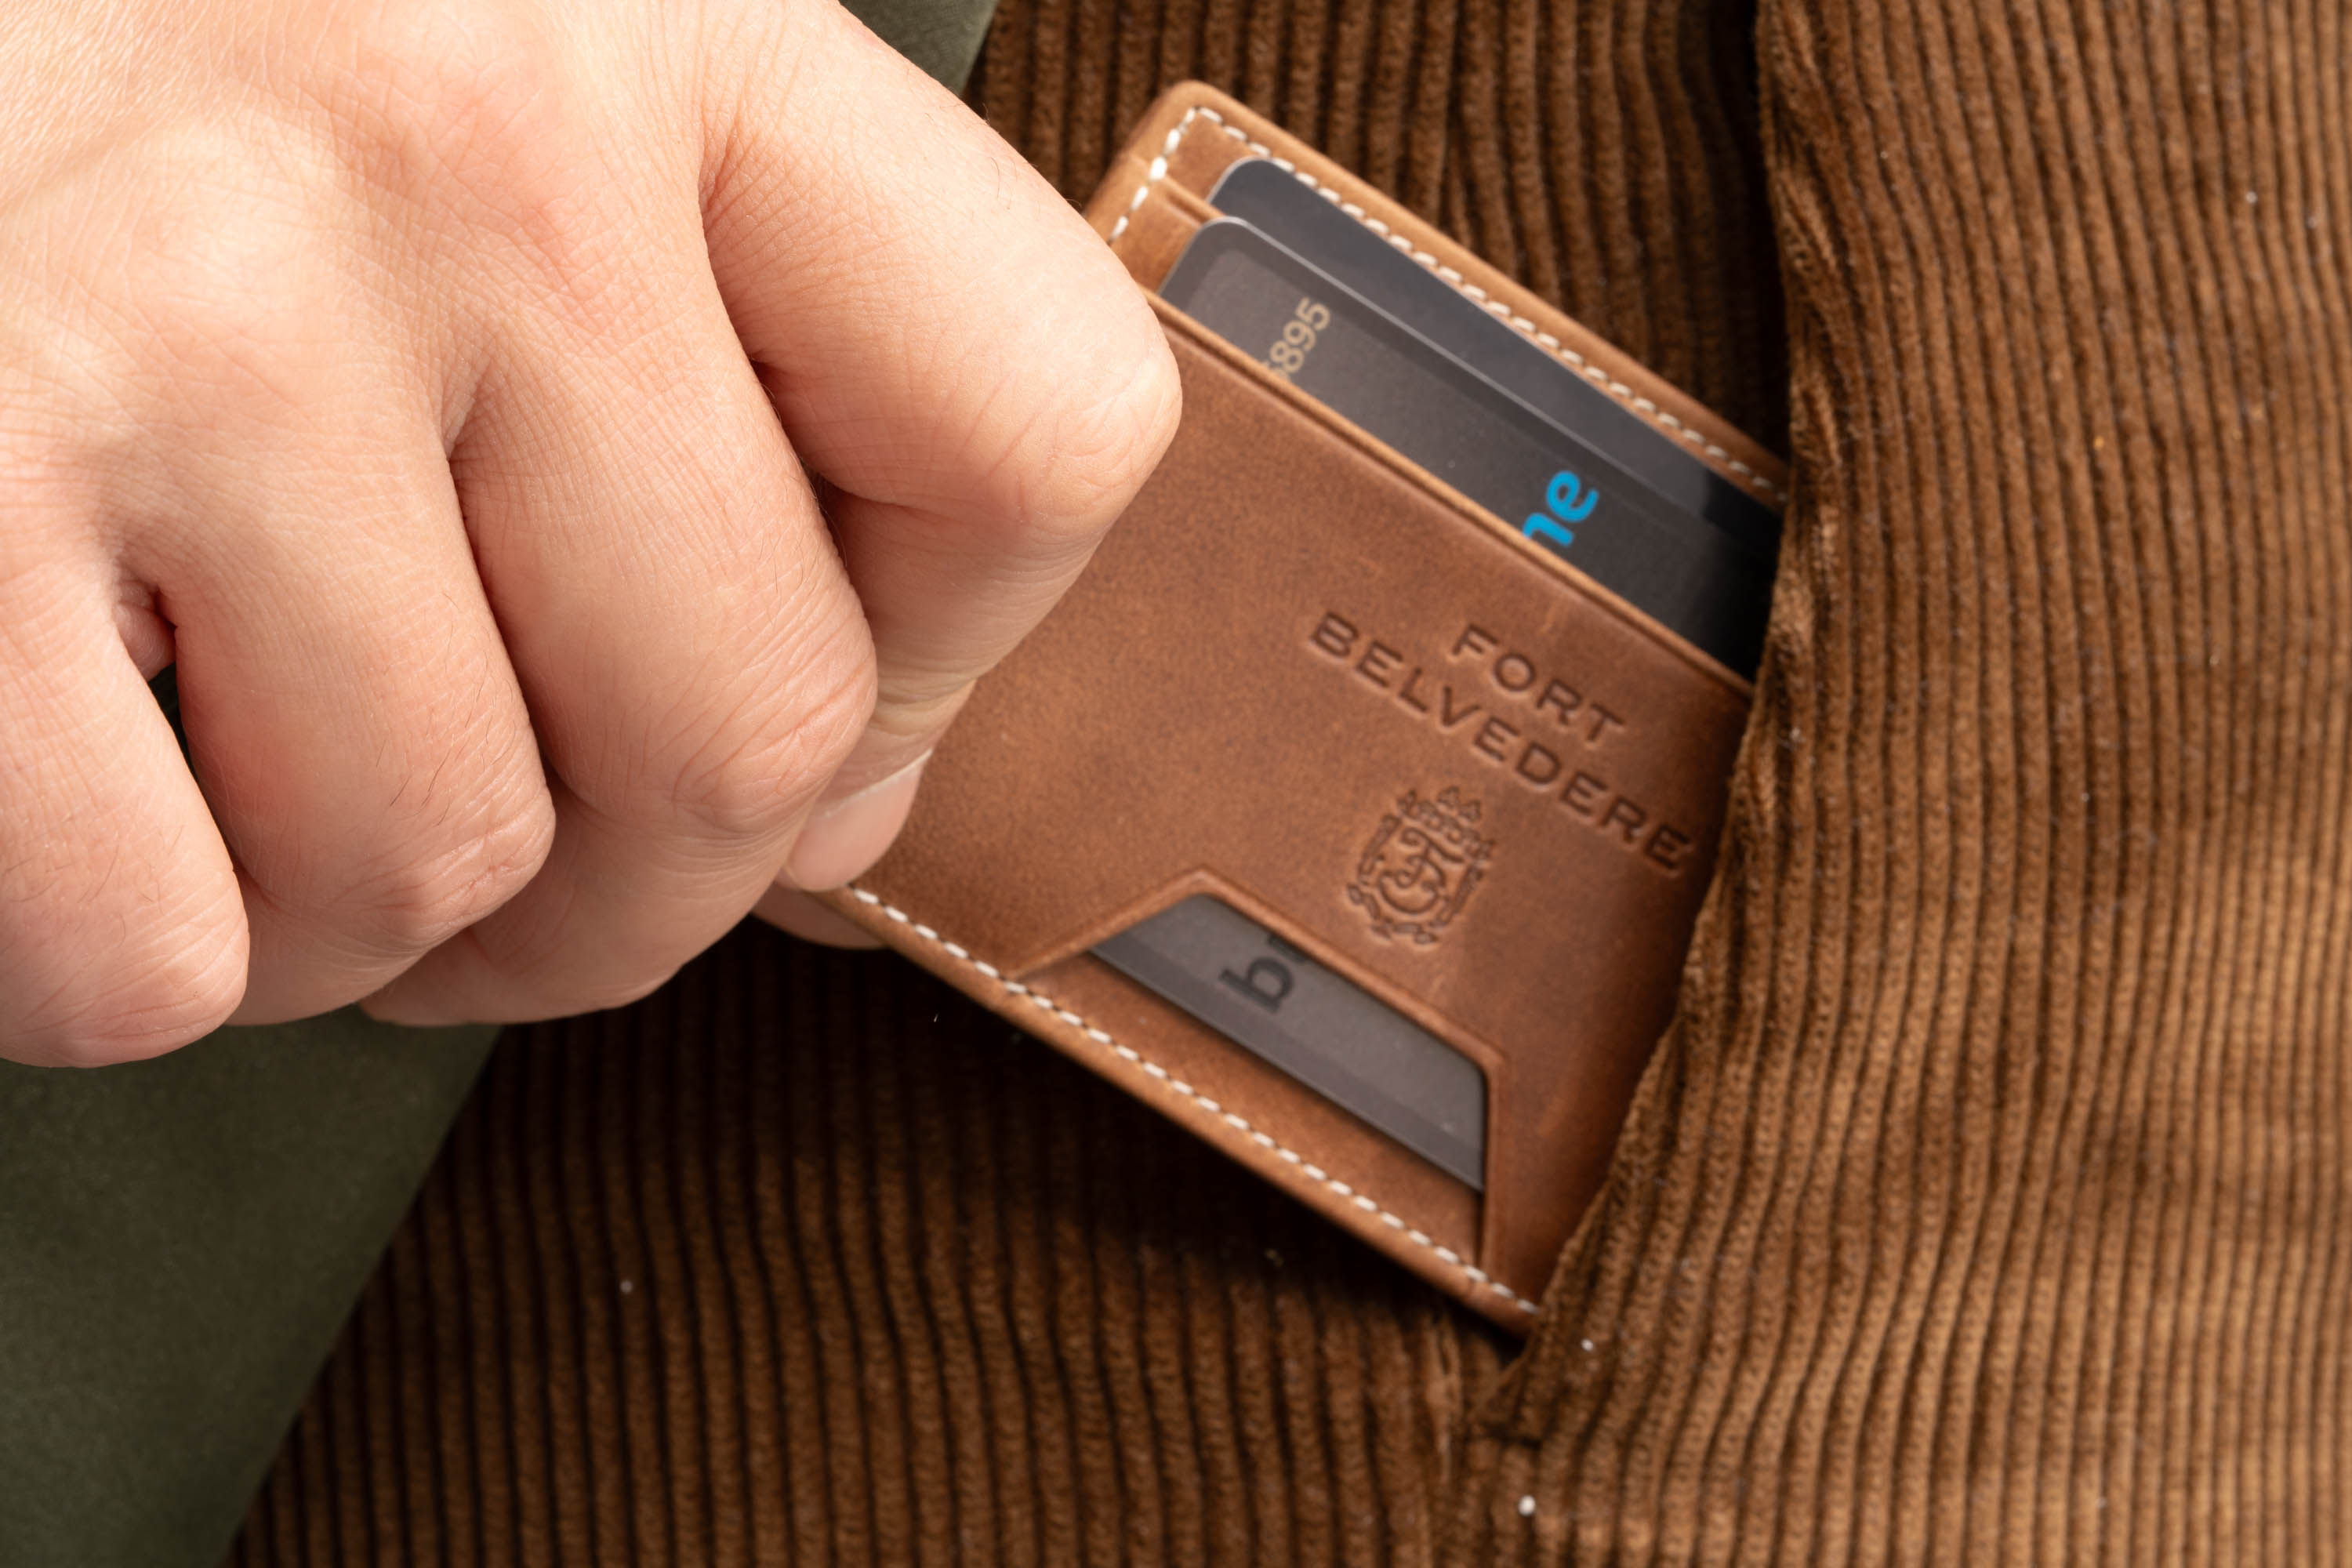 Four Card Carrier Slim Wallet in Saddle Brown Montecristo Leather is tastefully embossed with the Front Belvedere branding. 